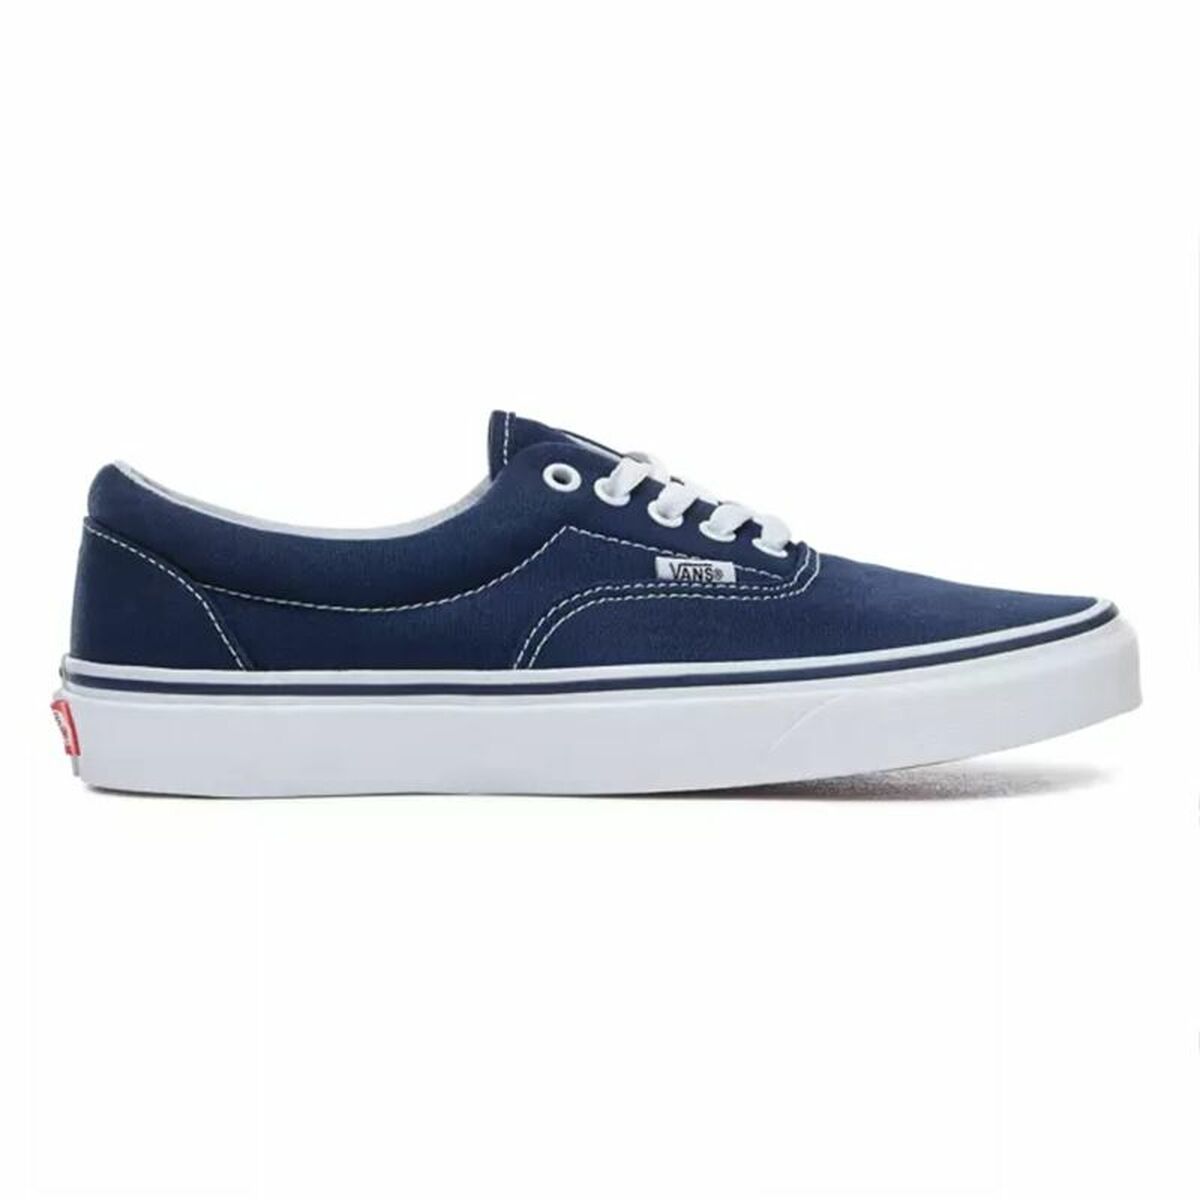 Chaussures casual homme Vans Blue marine